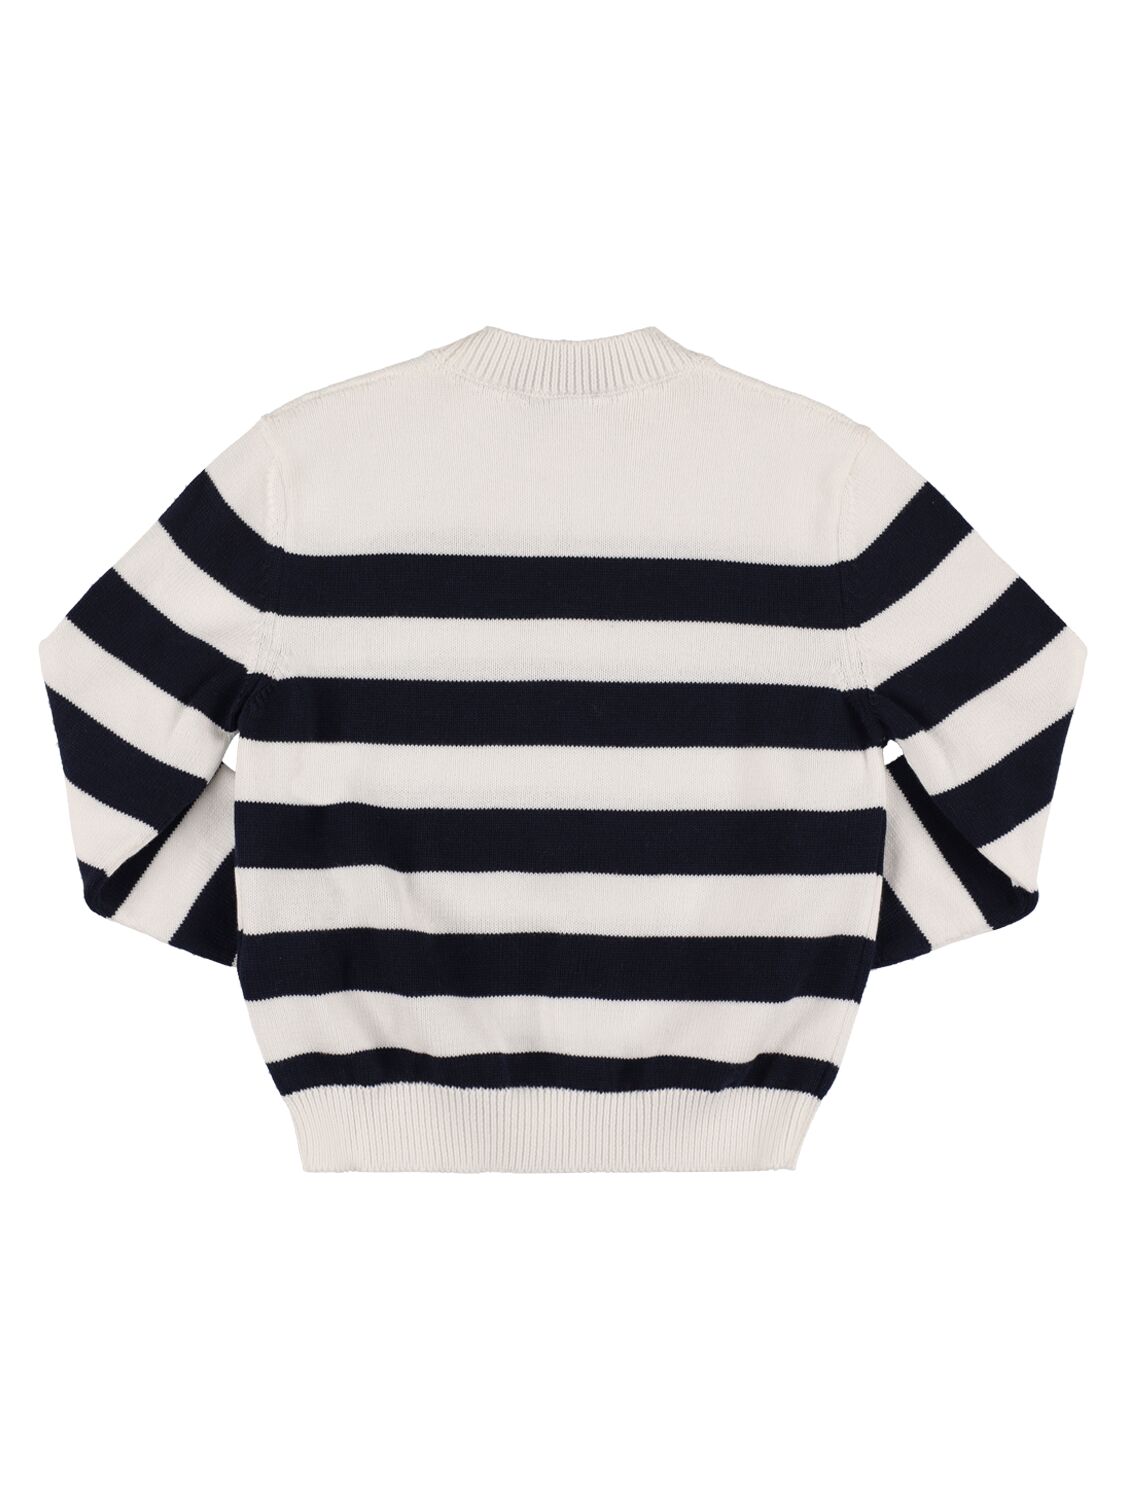 Shop Versace Printed Marine Knit Sweater In White,navy